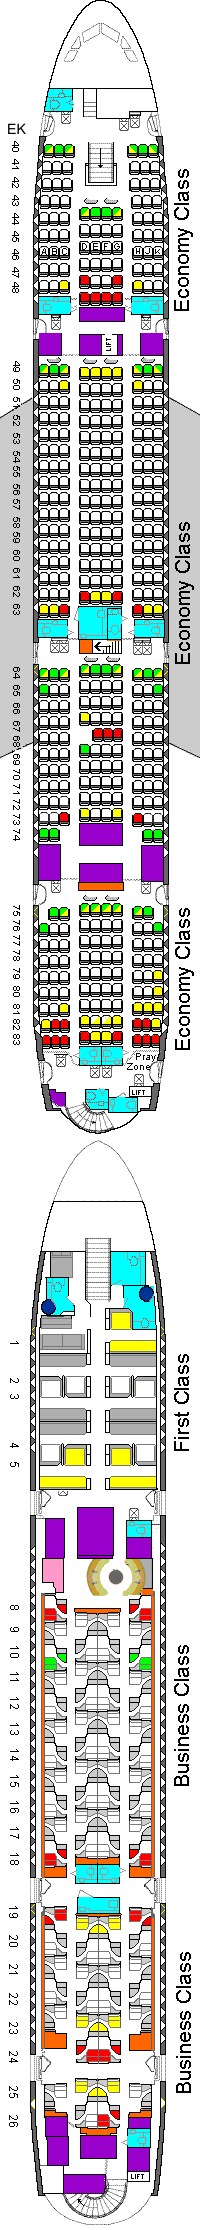 Etihad A380 seat map | EY A380-800 seating plan with pictures and best